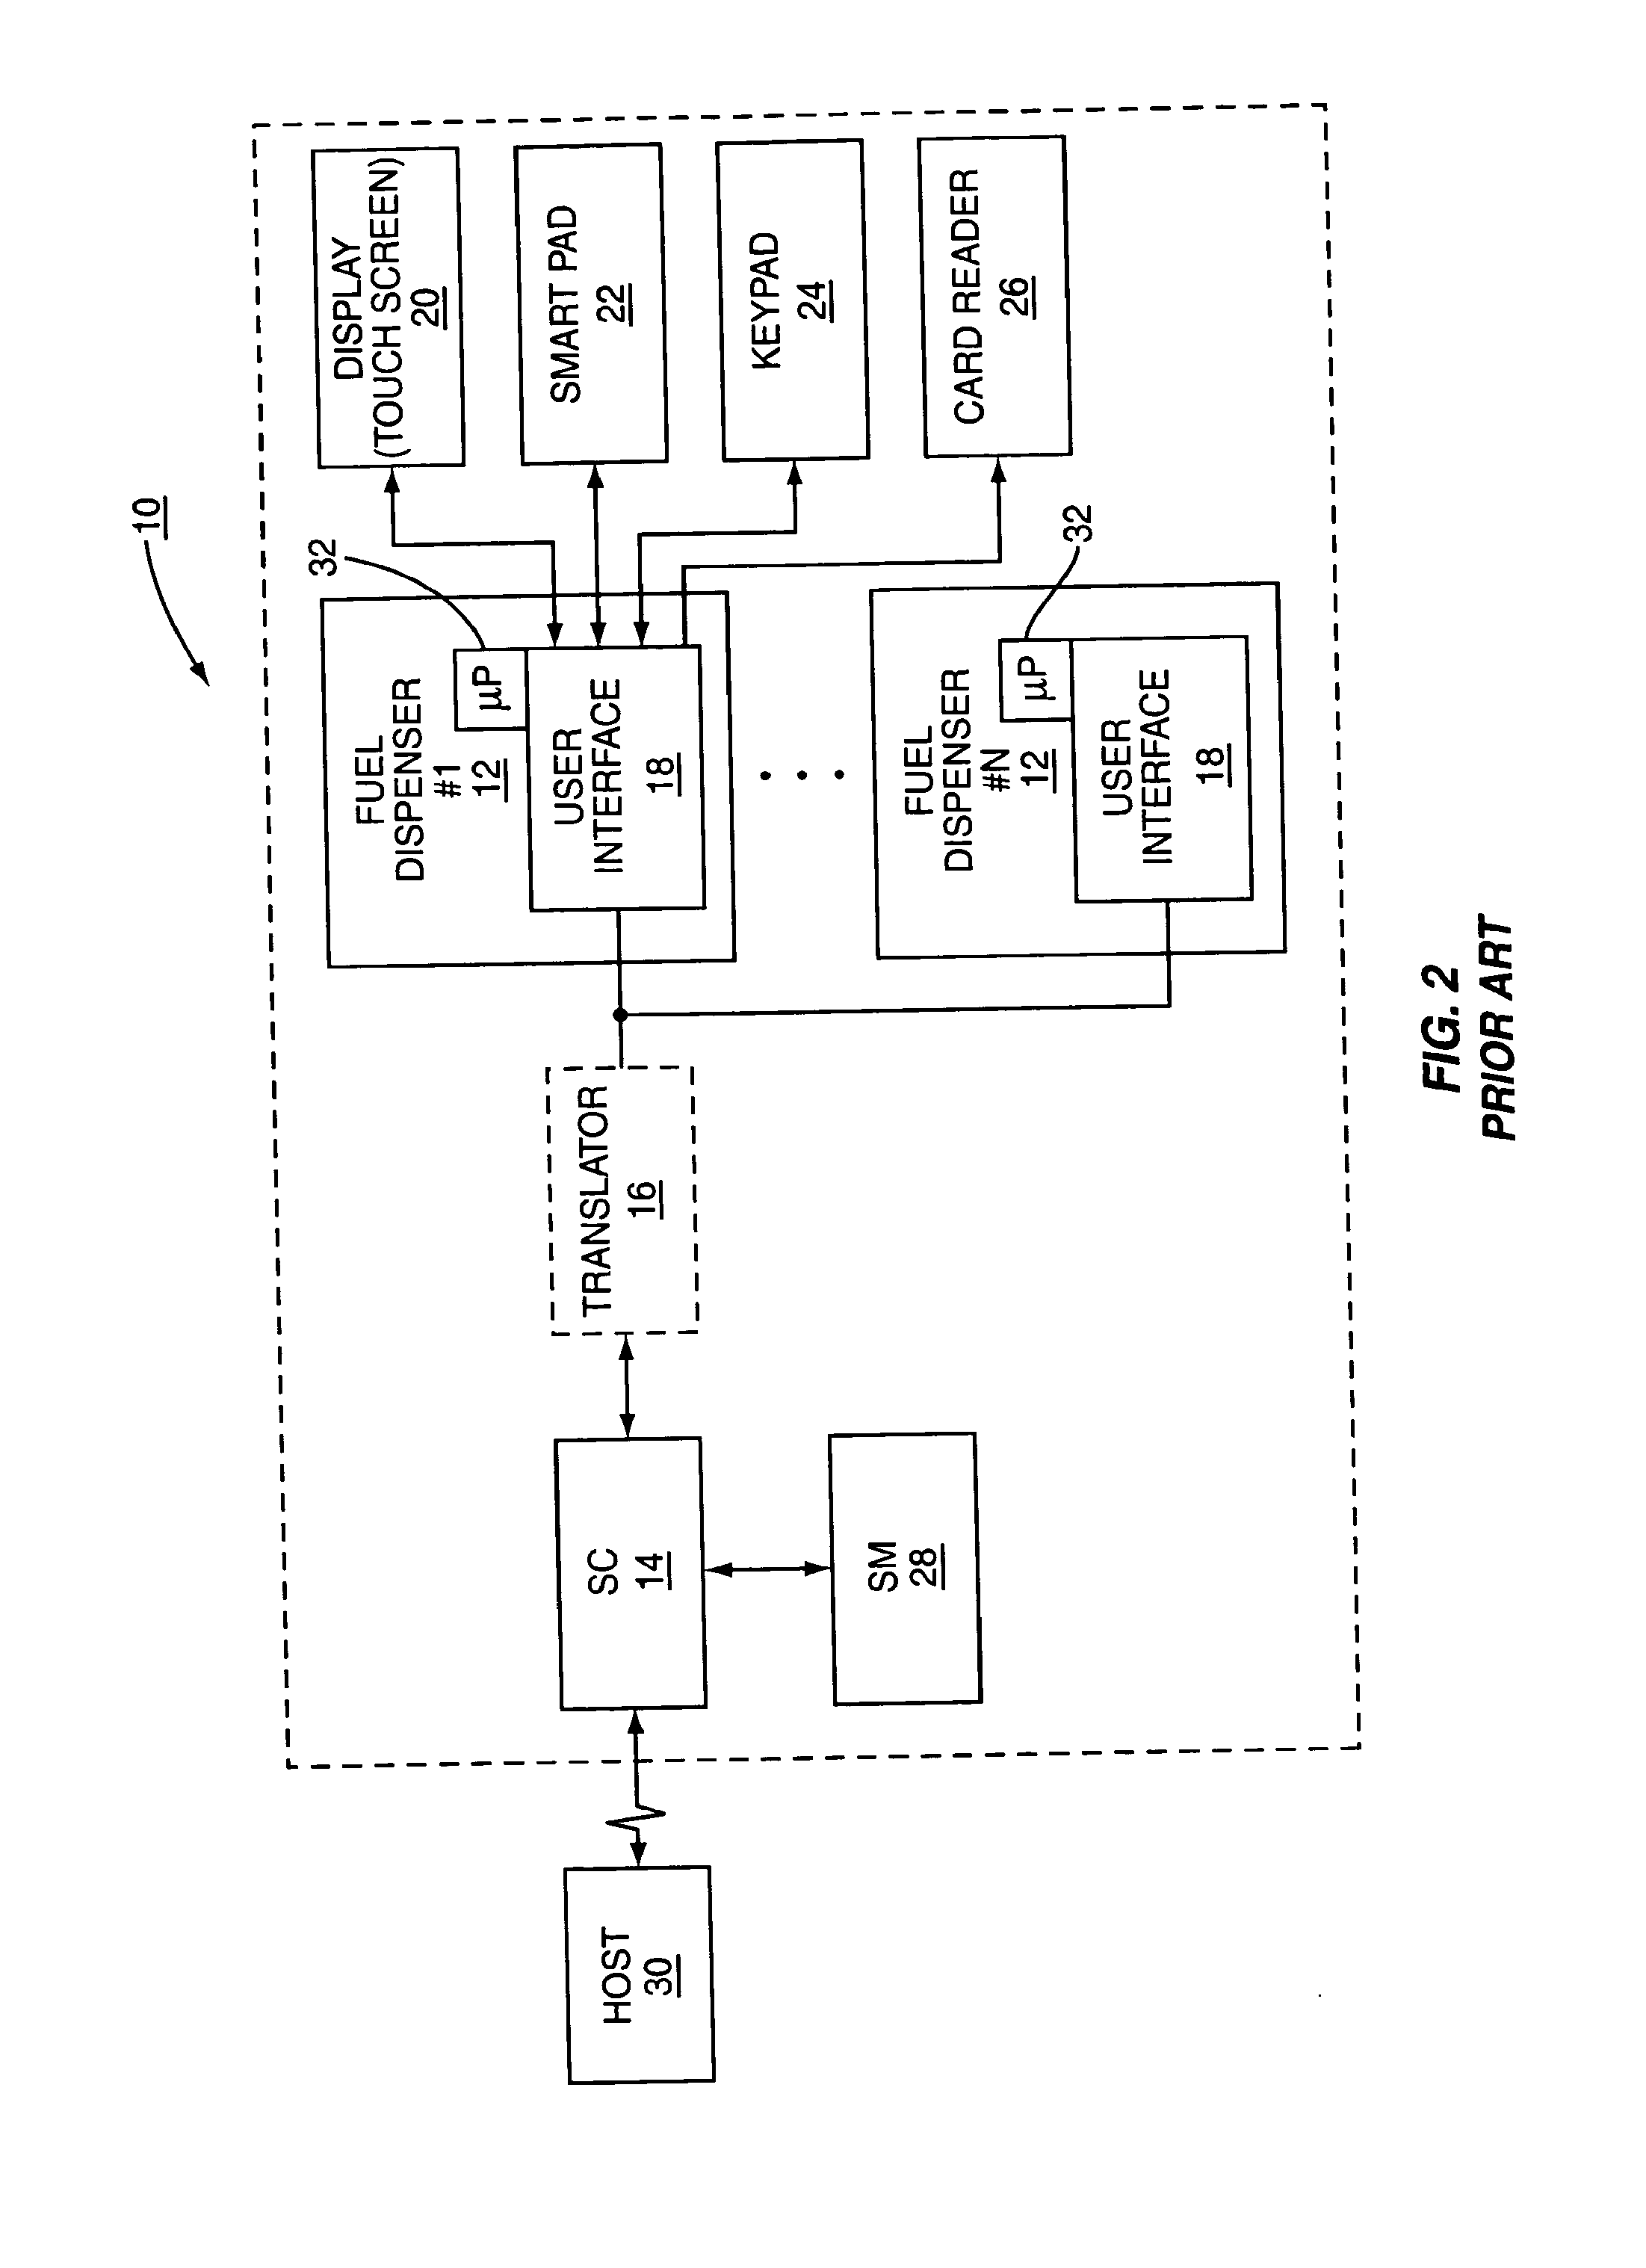 System and method for selective encryption of input data during a retail transaction